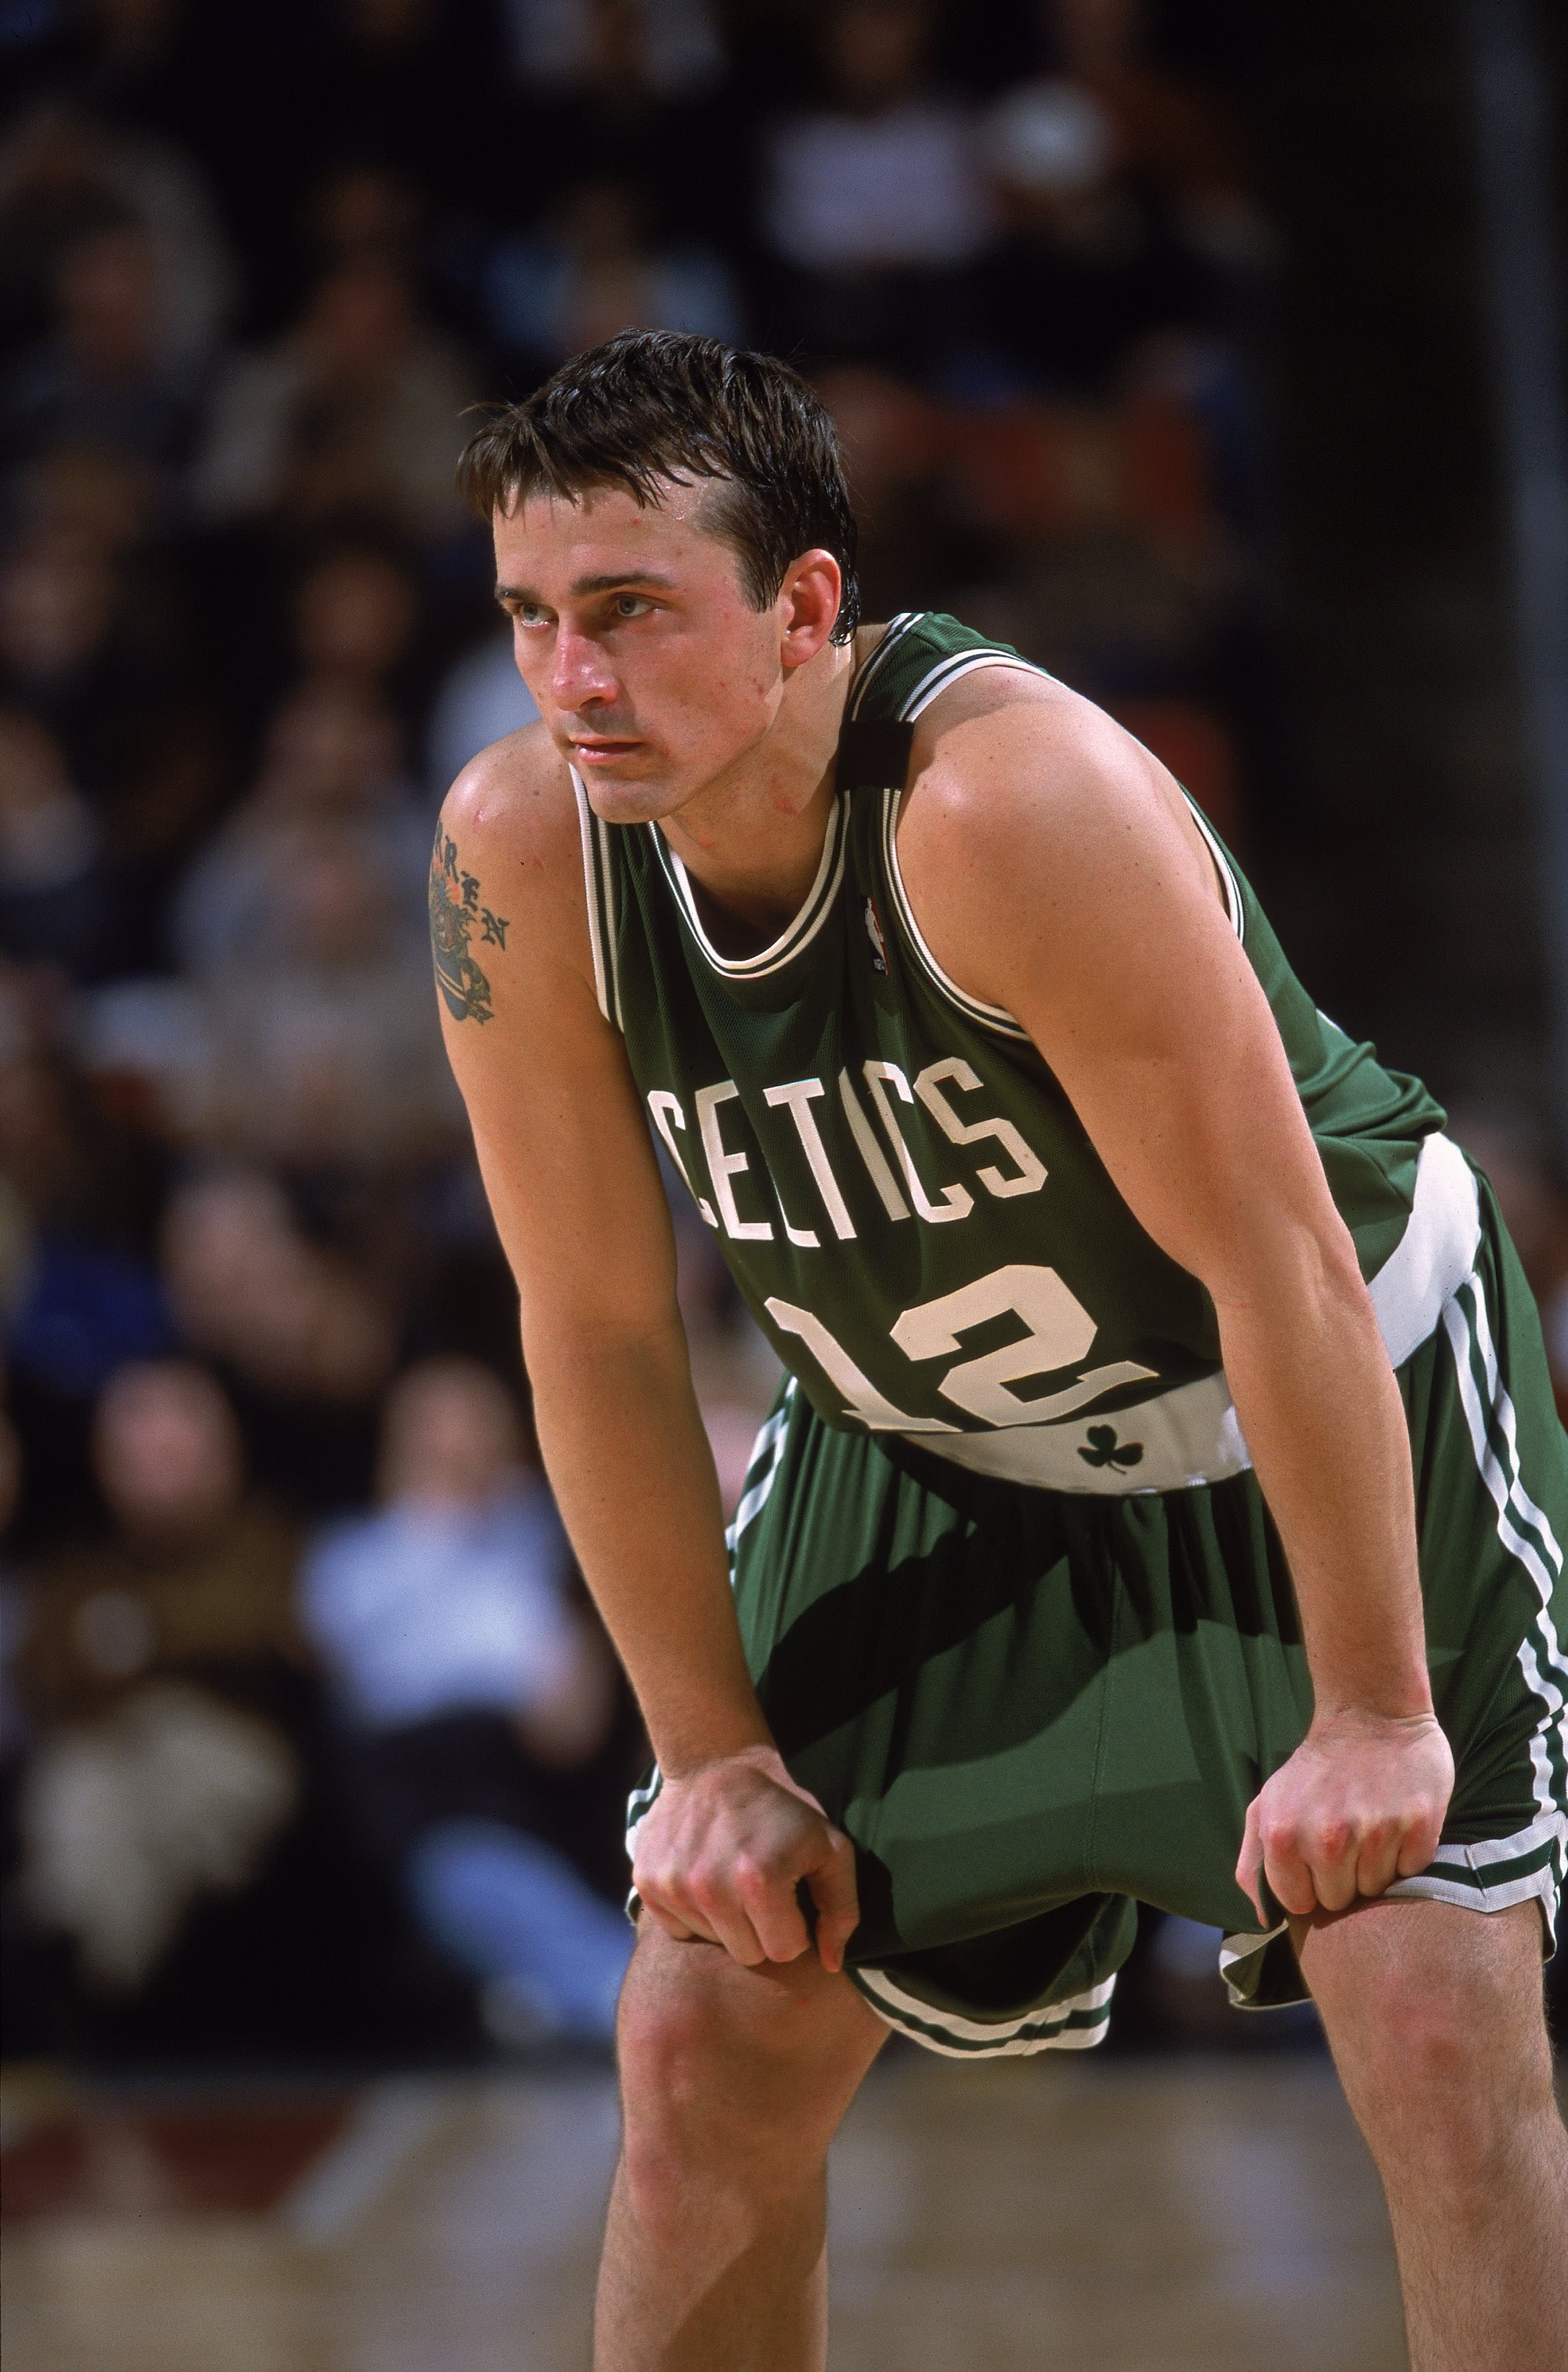 Former NBA player Herren recounts struggle with substance abuse